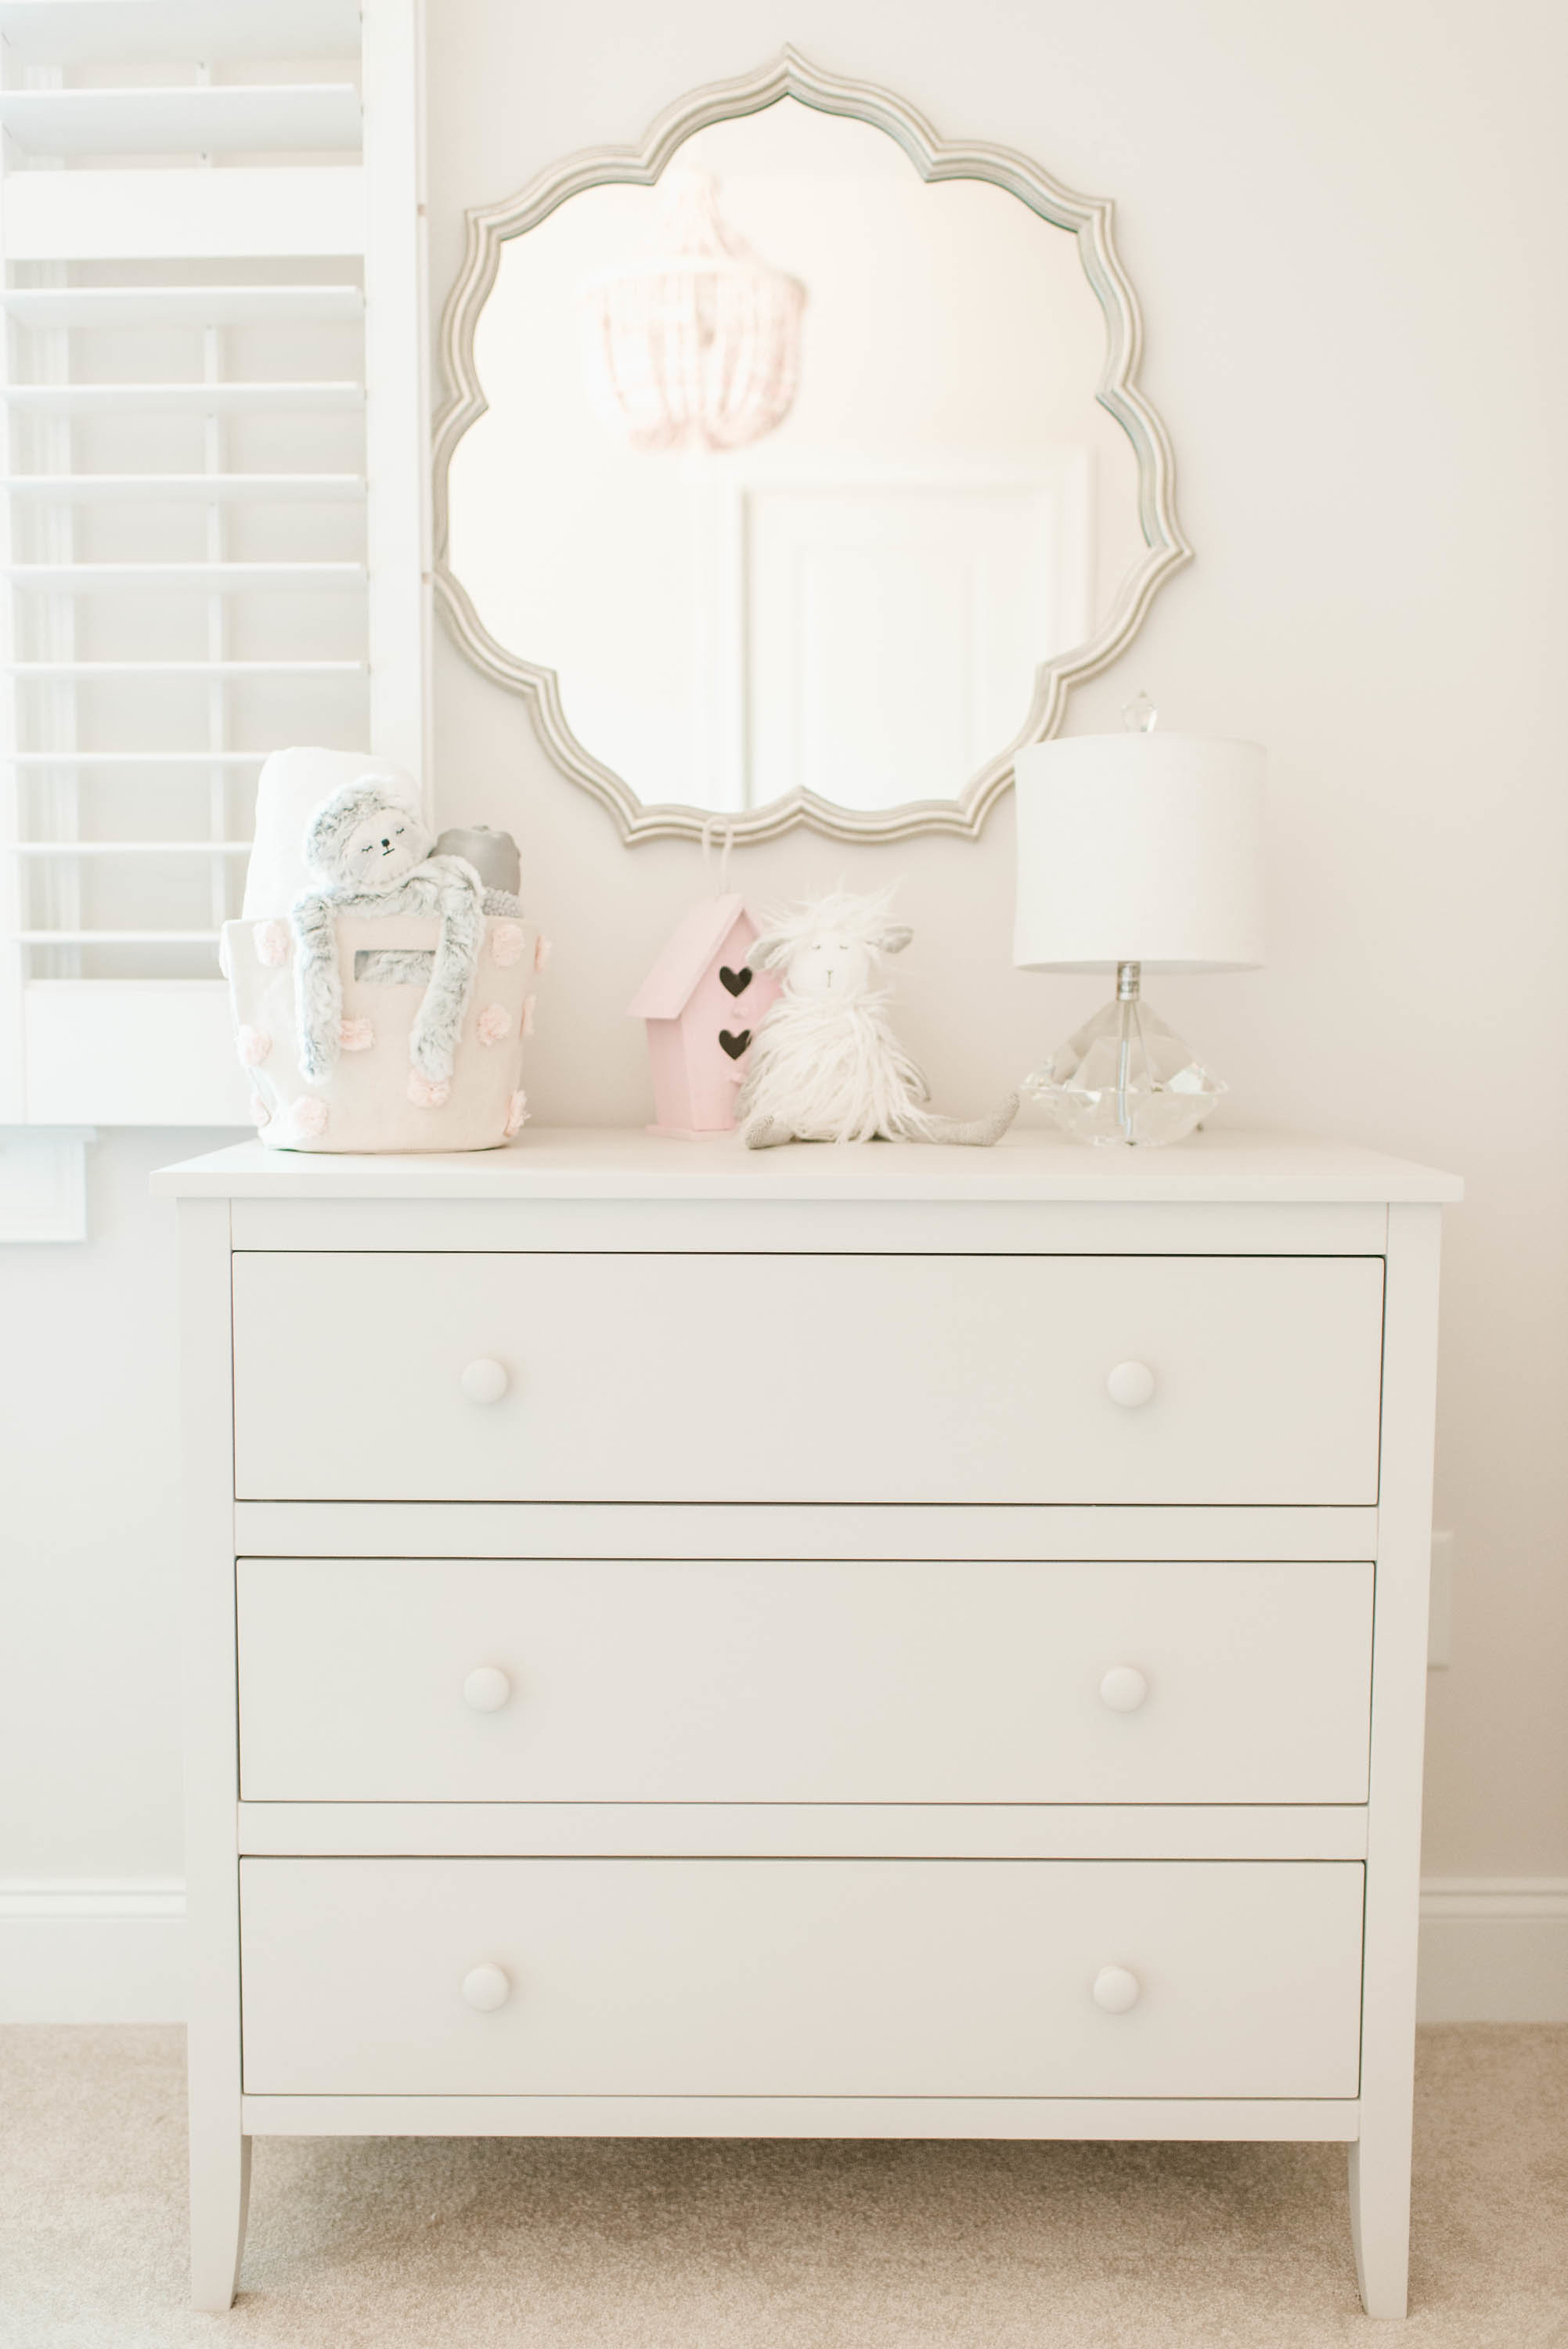 Silver Petal Mirror with White Dresser in Girl's Pink, White and Gray Nursery